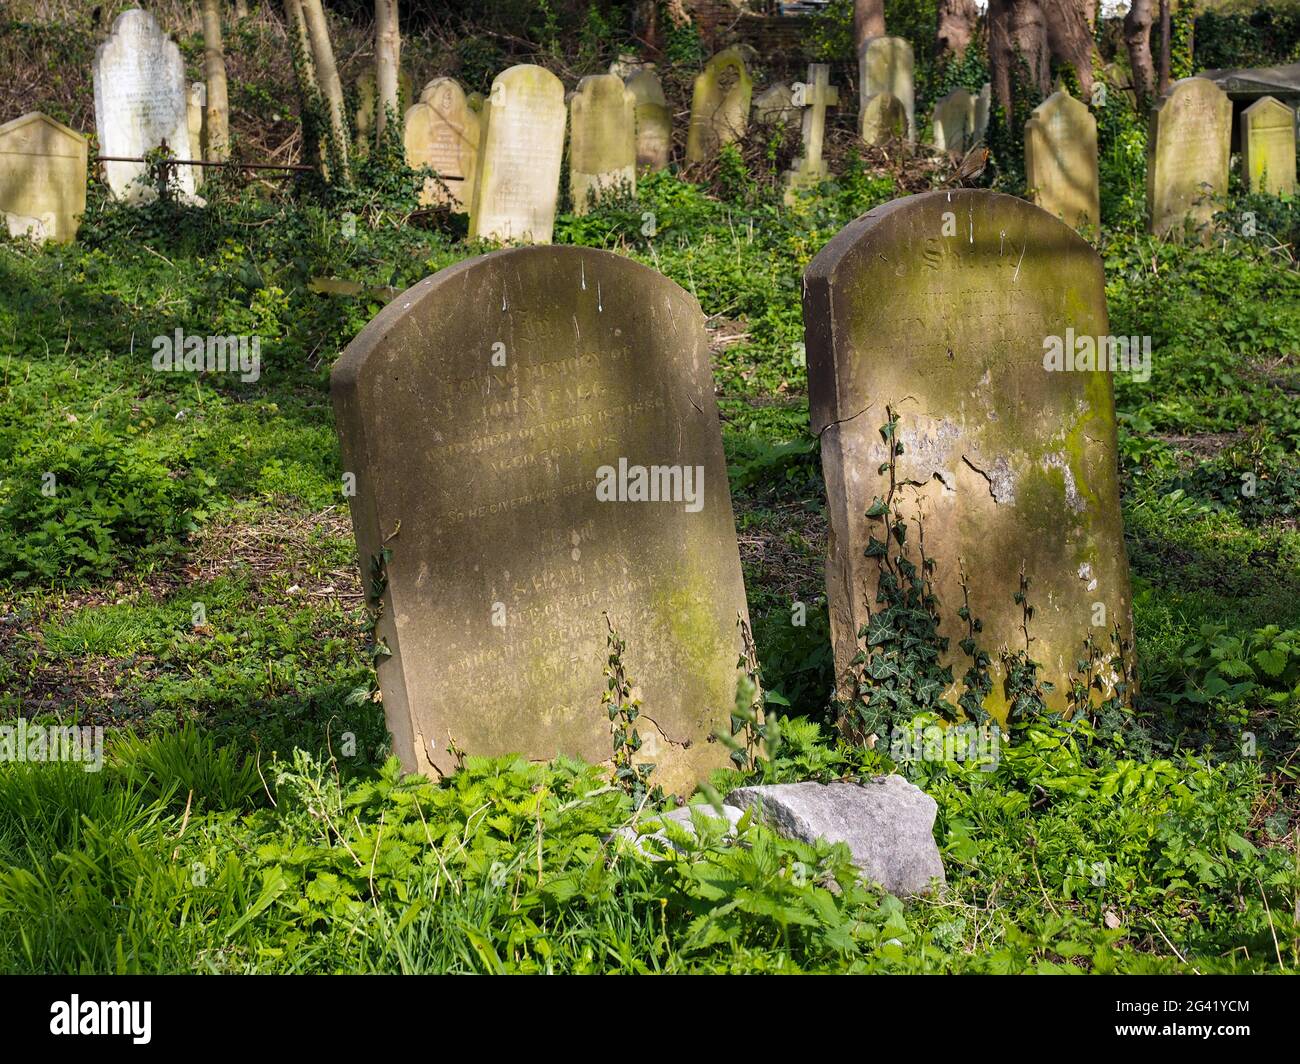 FAVERSHAM, KENT/UK - MARCH 29 : View of St Mary of Charity Church graveyard in Faversham Kent on March 29, 2014 Stock Photo